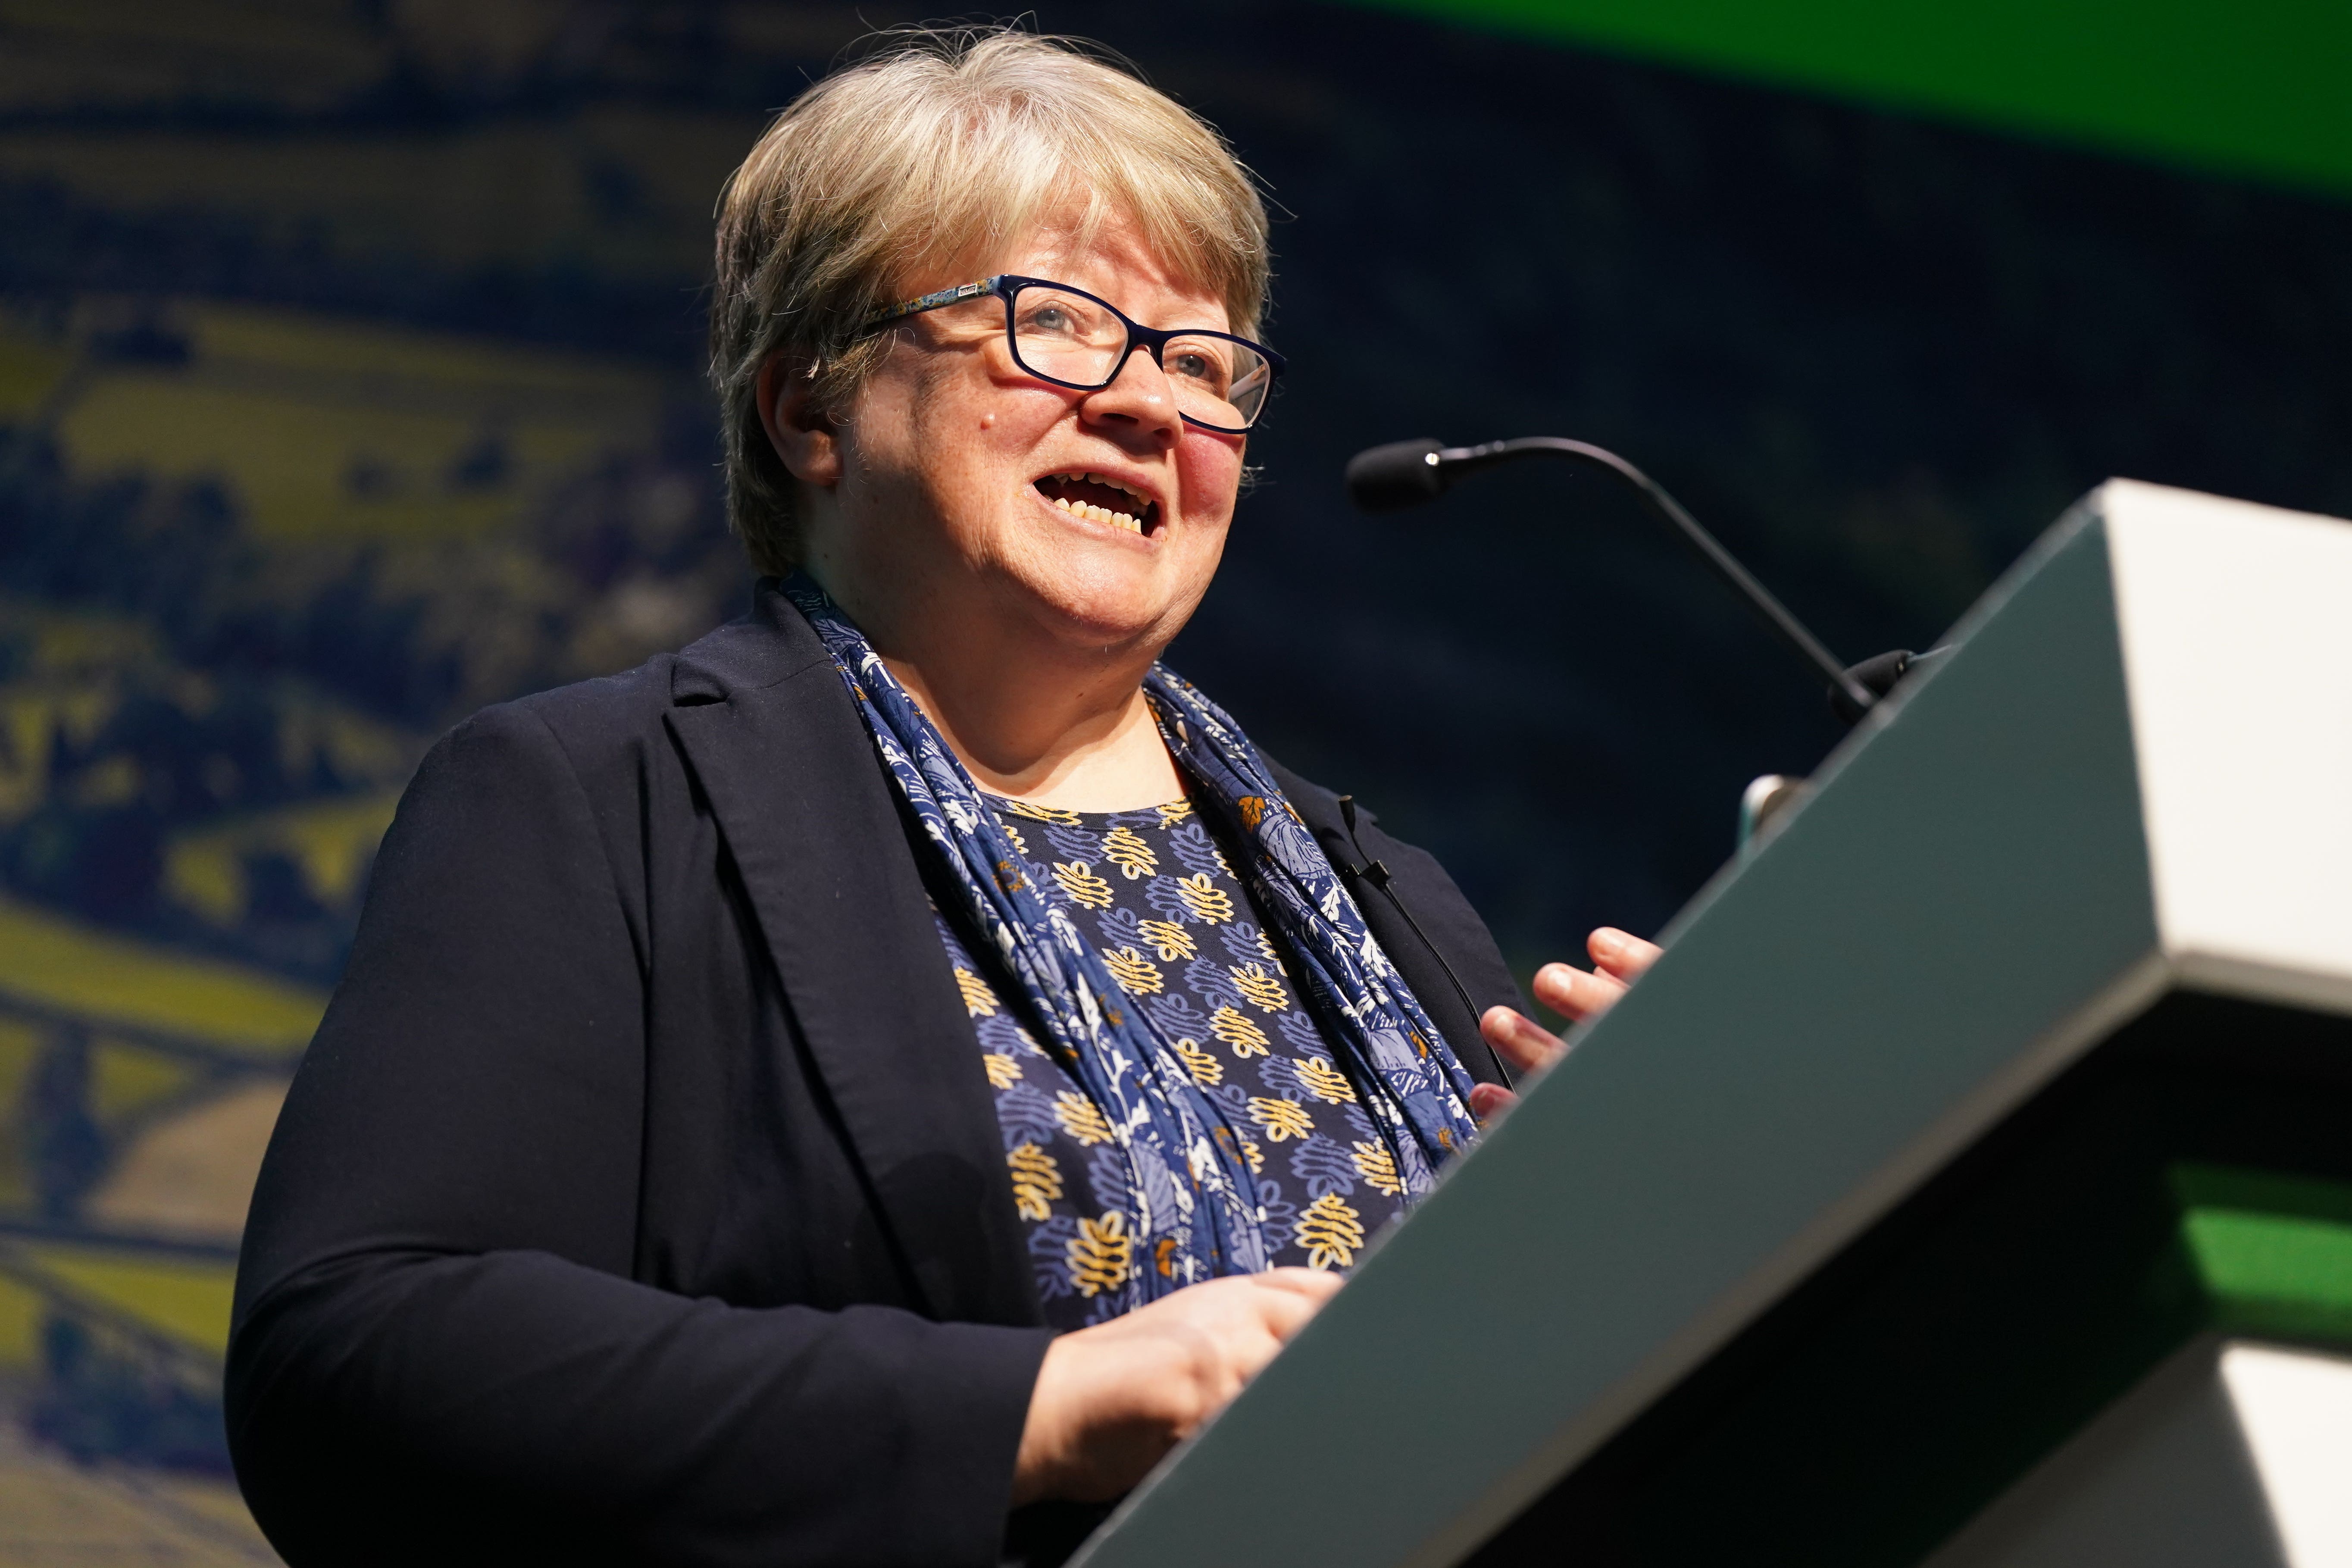 Environment secretary Therese Coffey has told people to eat turnips